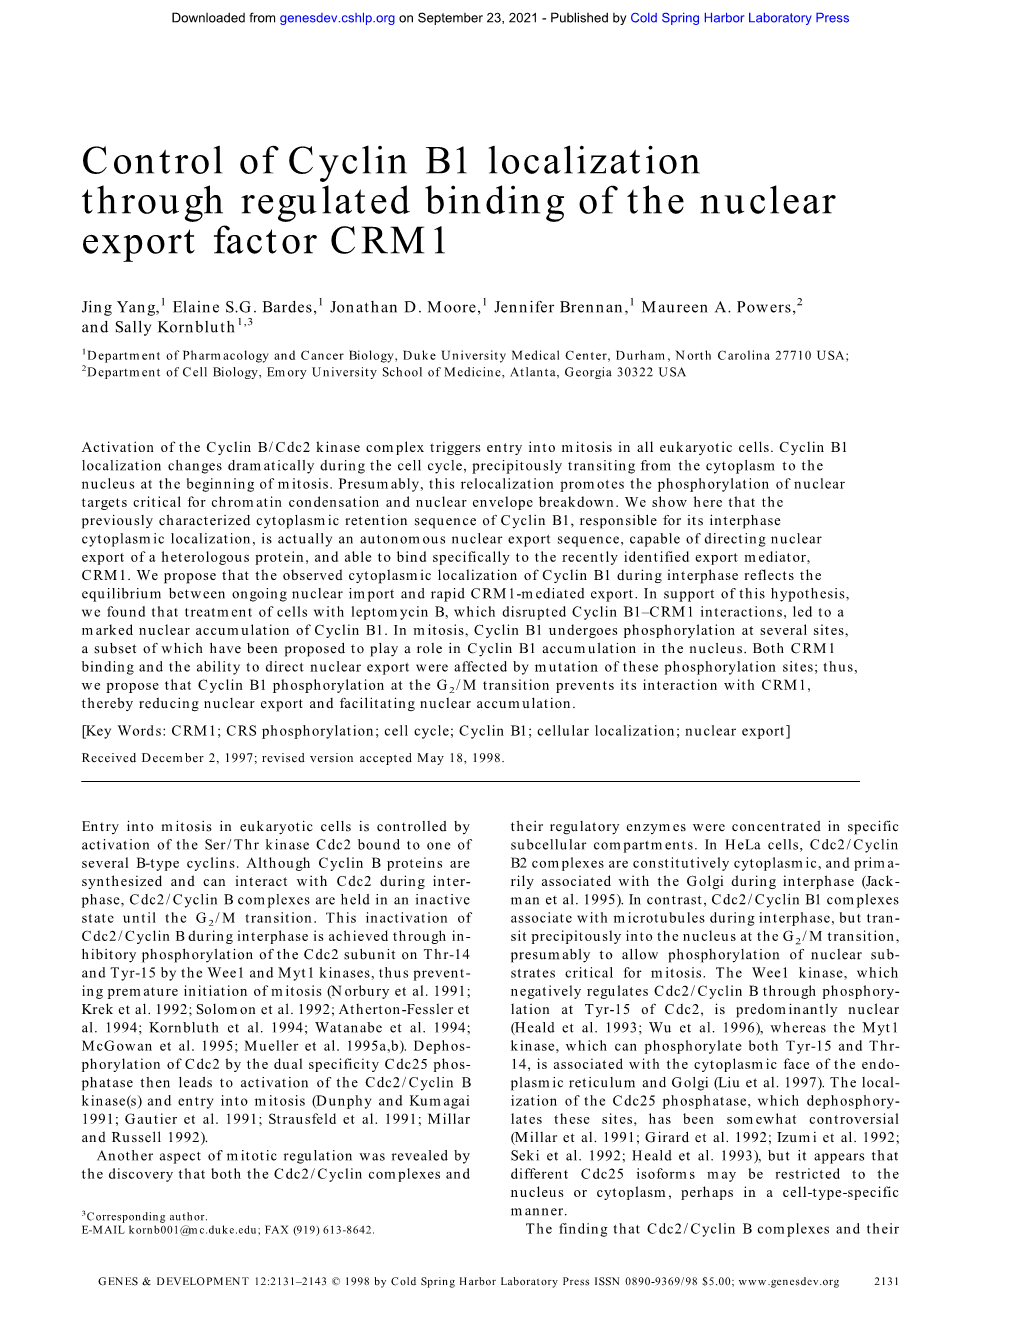 Control of Cyclin B1 Localization Through Regulated Binding of the Nuclear Export Factor CRM1